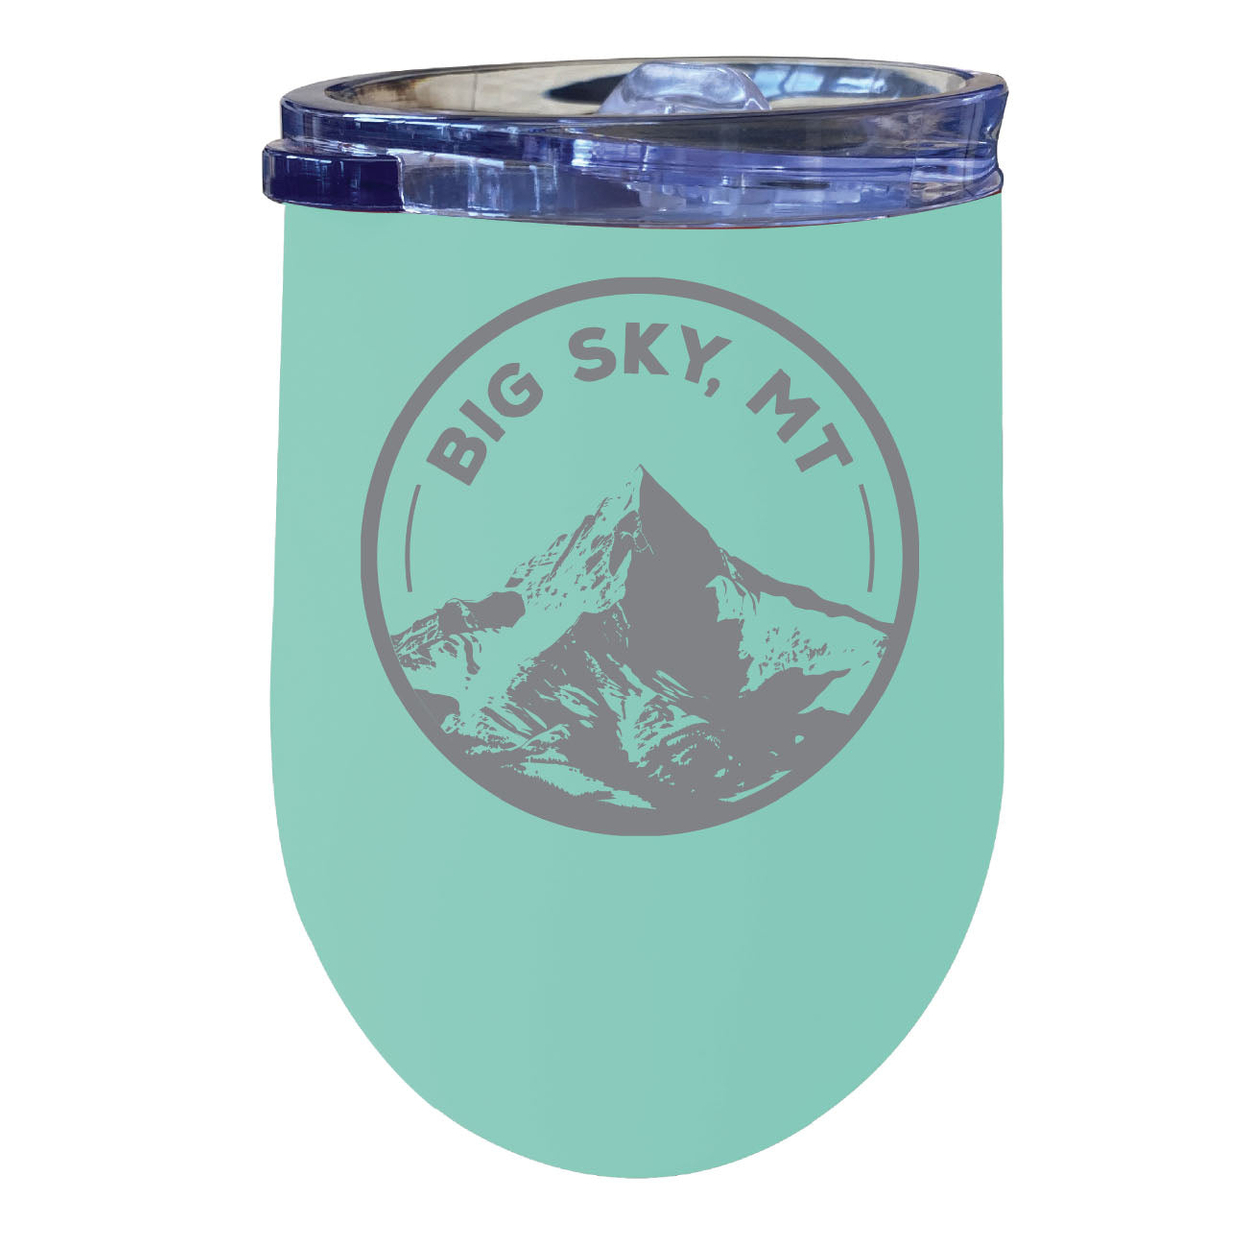 Big Sky Montana Souvenir 12 Oz Engraved Insulated Wine Stainless Steel Tumbler - Navy,,4-Pack